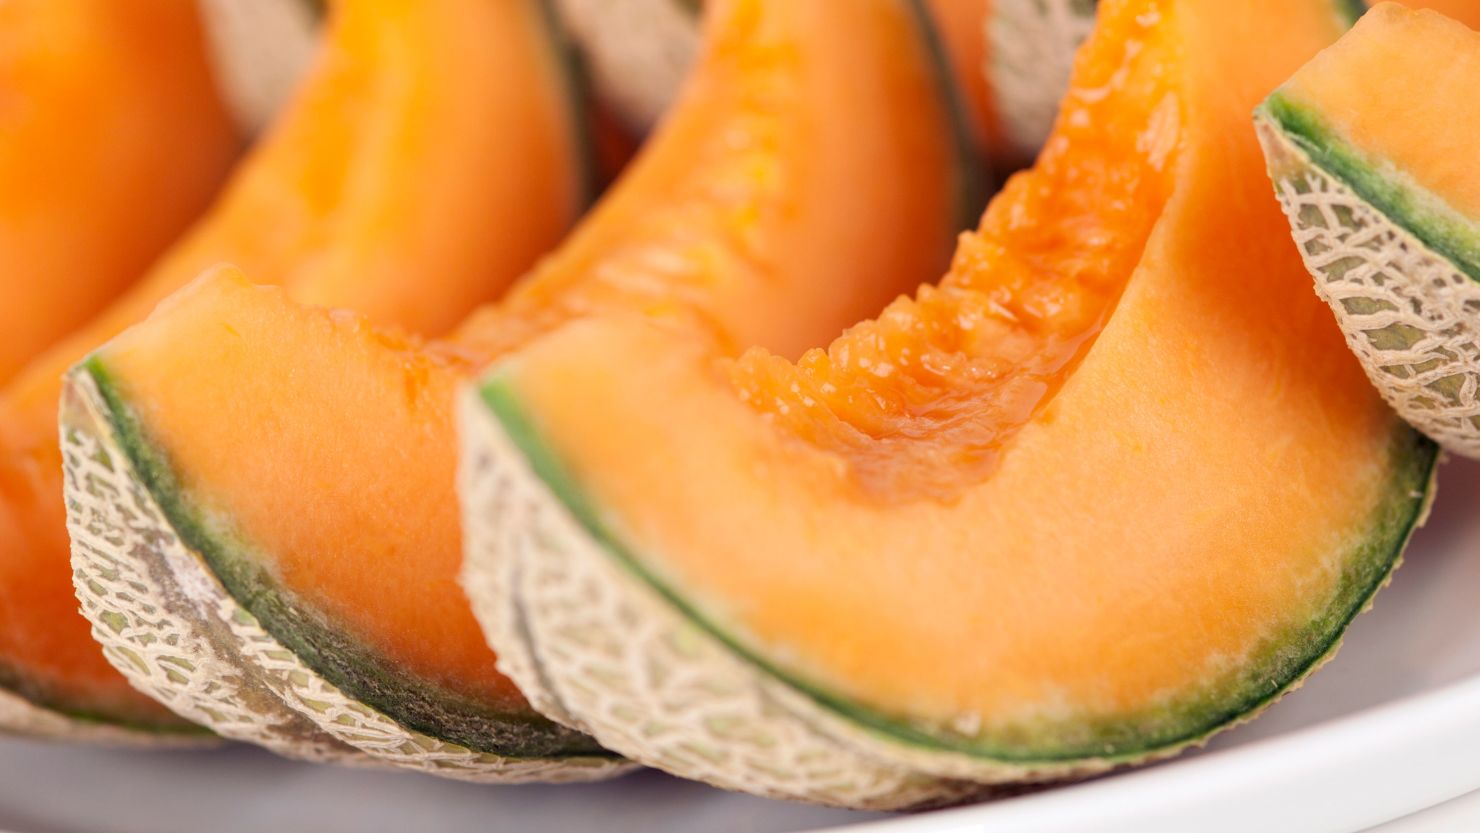 “Do not eat pre-cut cantaloupes if you don’t know whether Malichita or Rudy brand cantaloupes were used,” the CDC has warned.